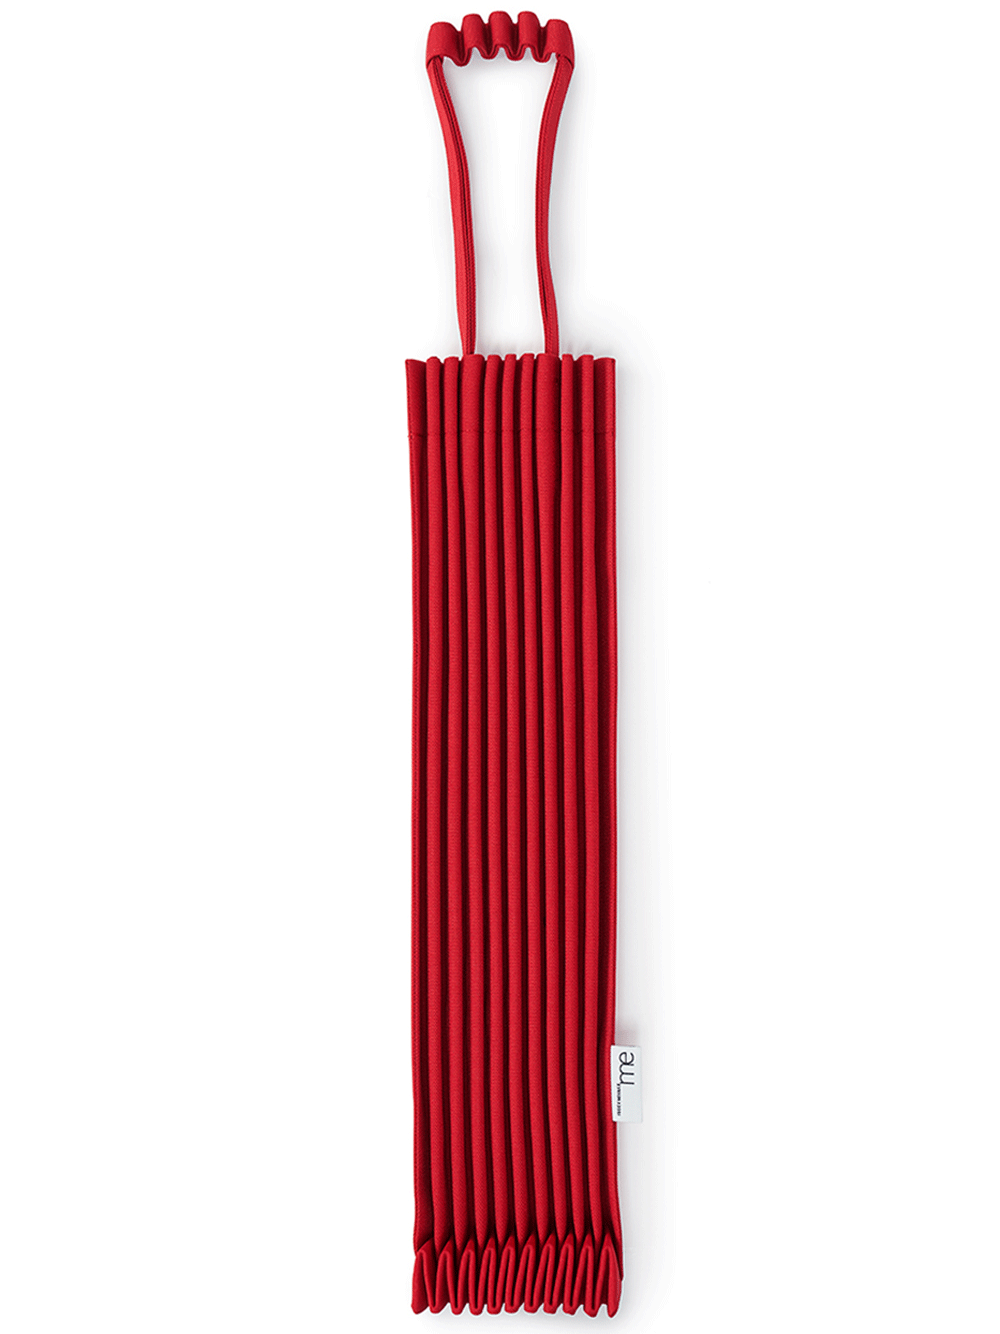 me ISSEY MIYAKE Trunk Pleats Bag 12 Red 1